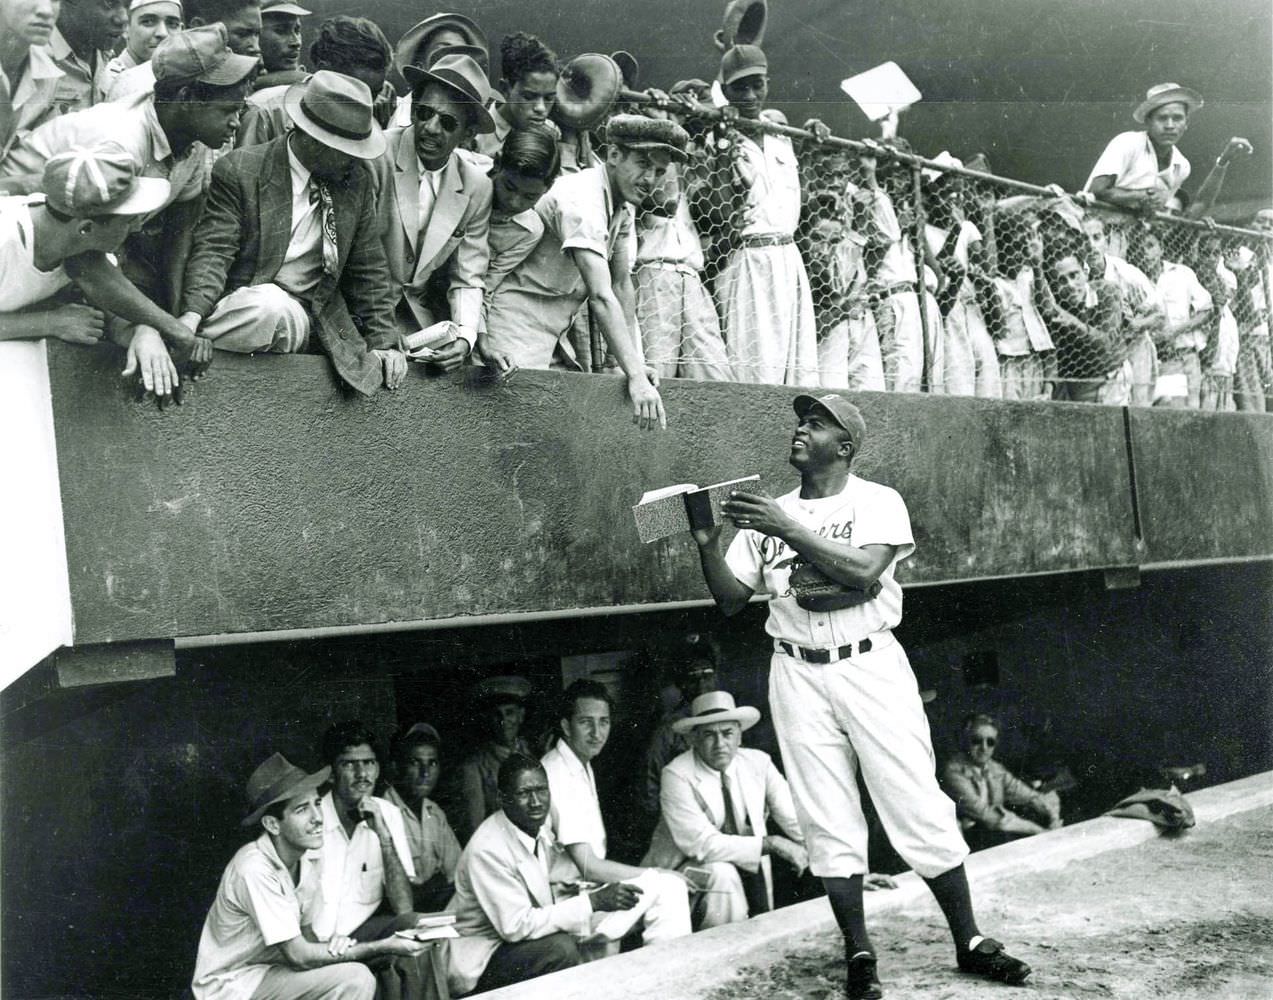 Jackie Robinson, foreground, and the Brooklyn Dodgers at spring training in March of 1947 in Havana, Cuba